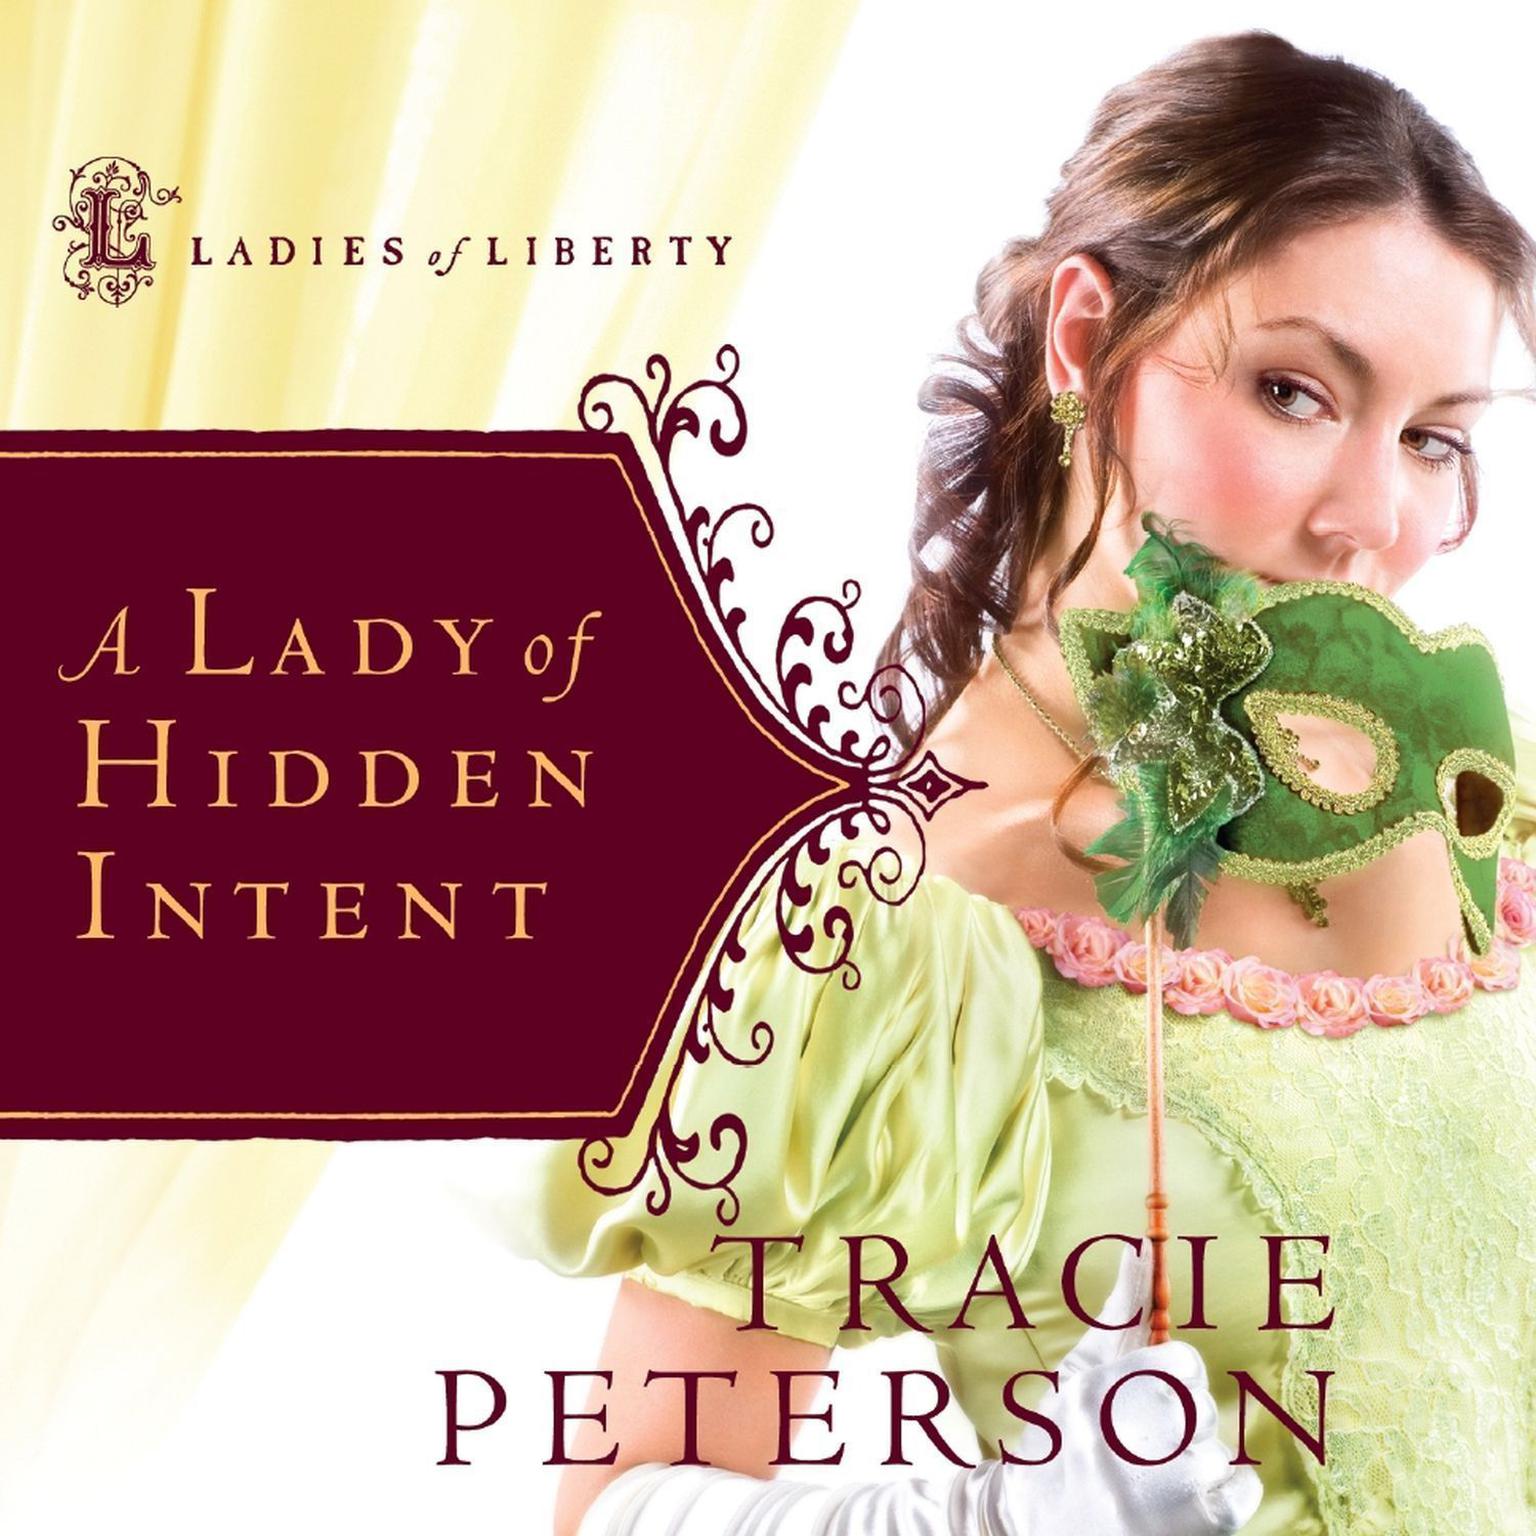 A Lady of Hidden Intent (Abridged) Audiobook, by Tracie Peterson